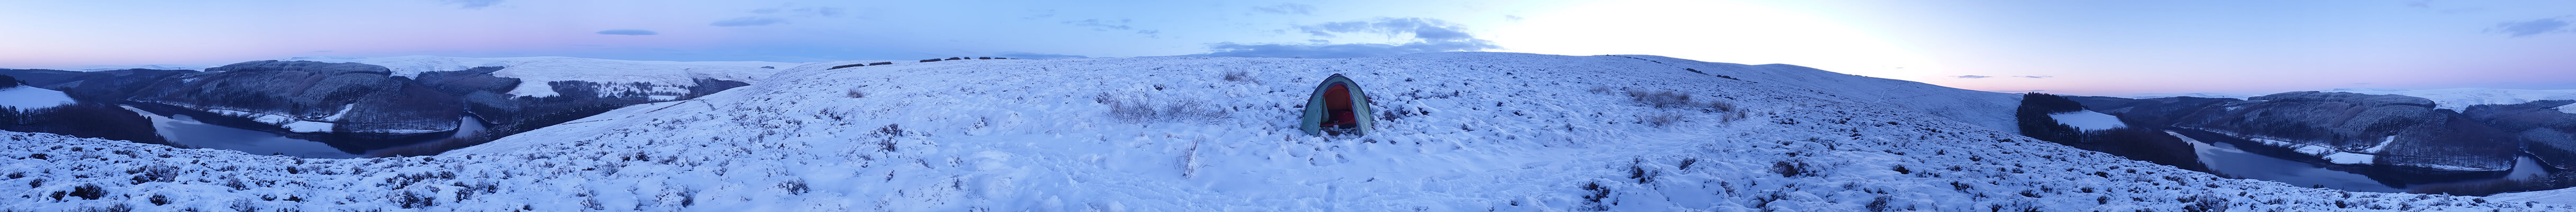 Camping in the snow